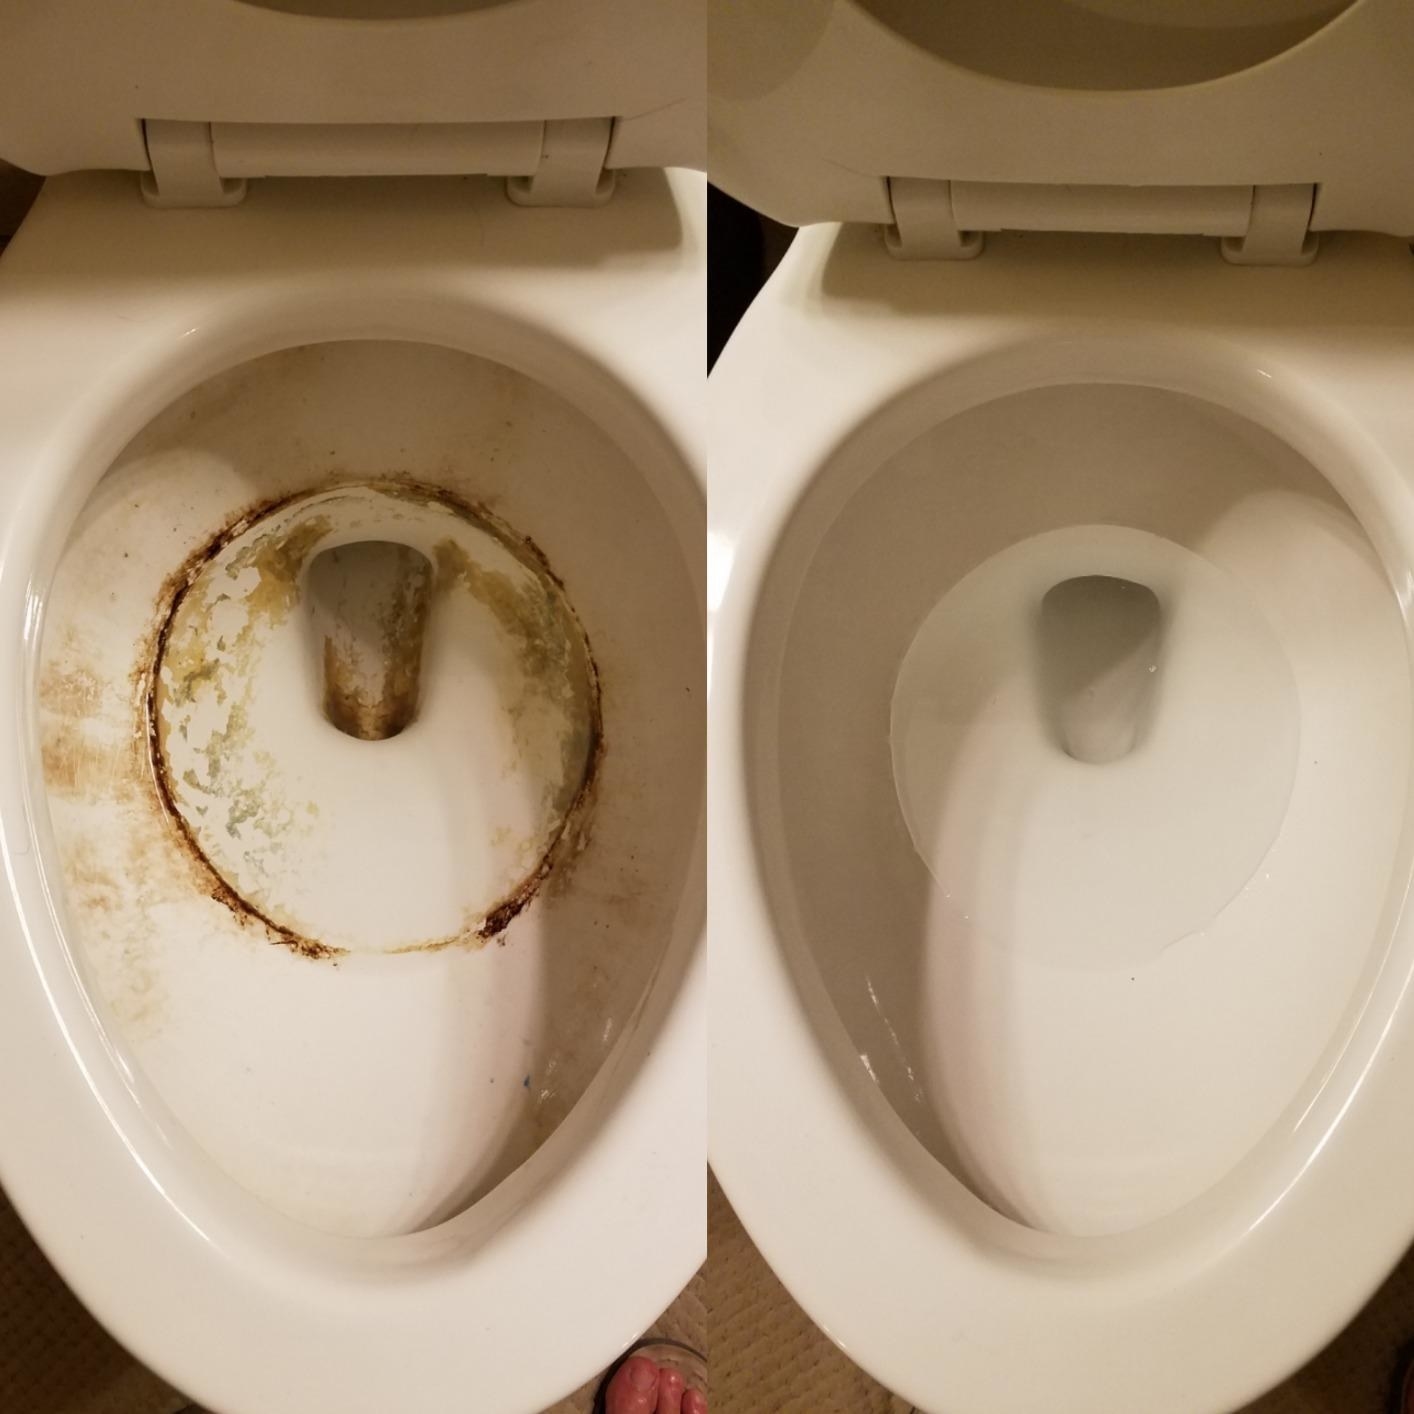 24 Things That Actually Make Cleaning Toilets Incredibly Easy